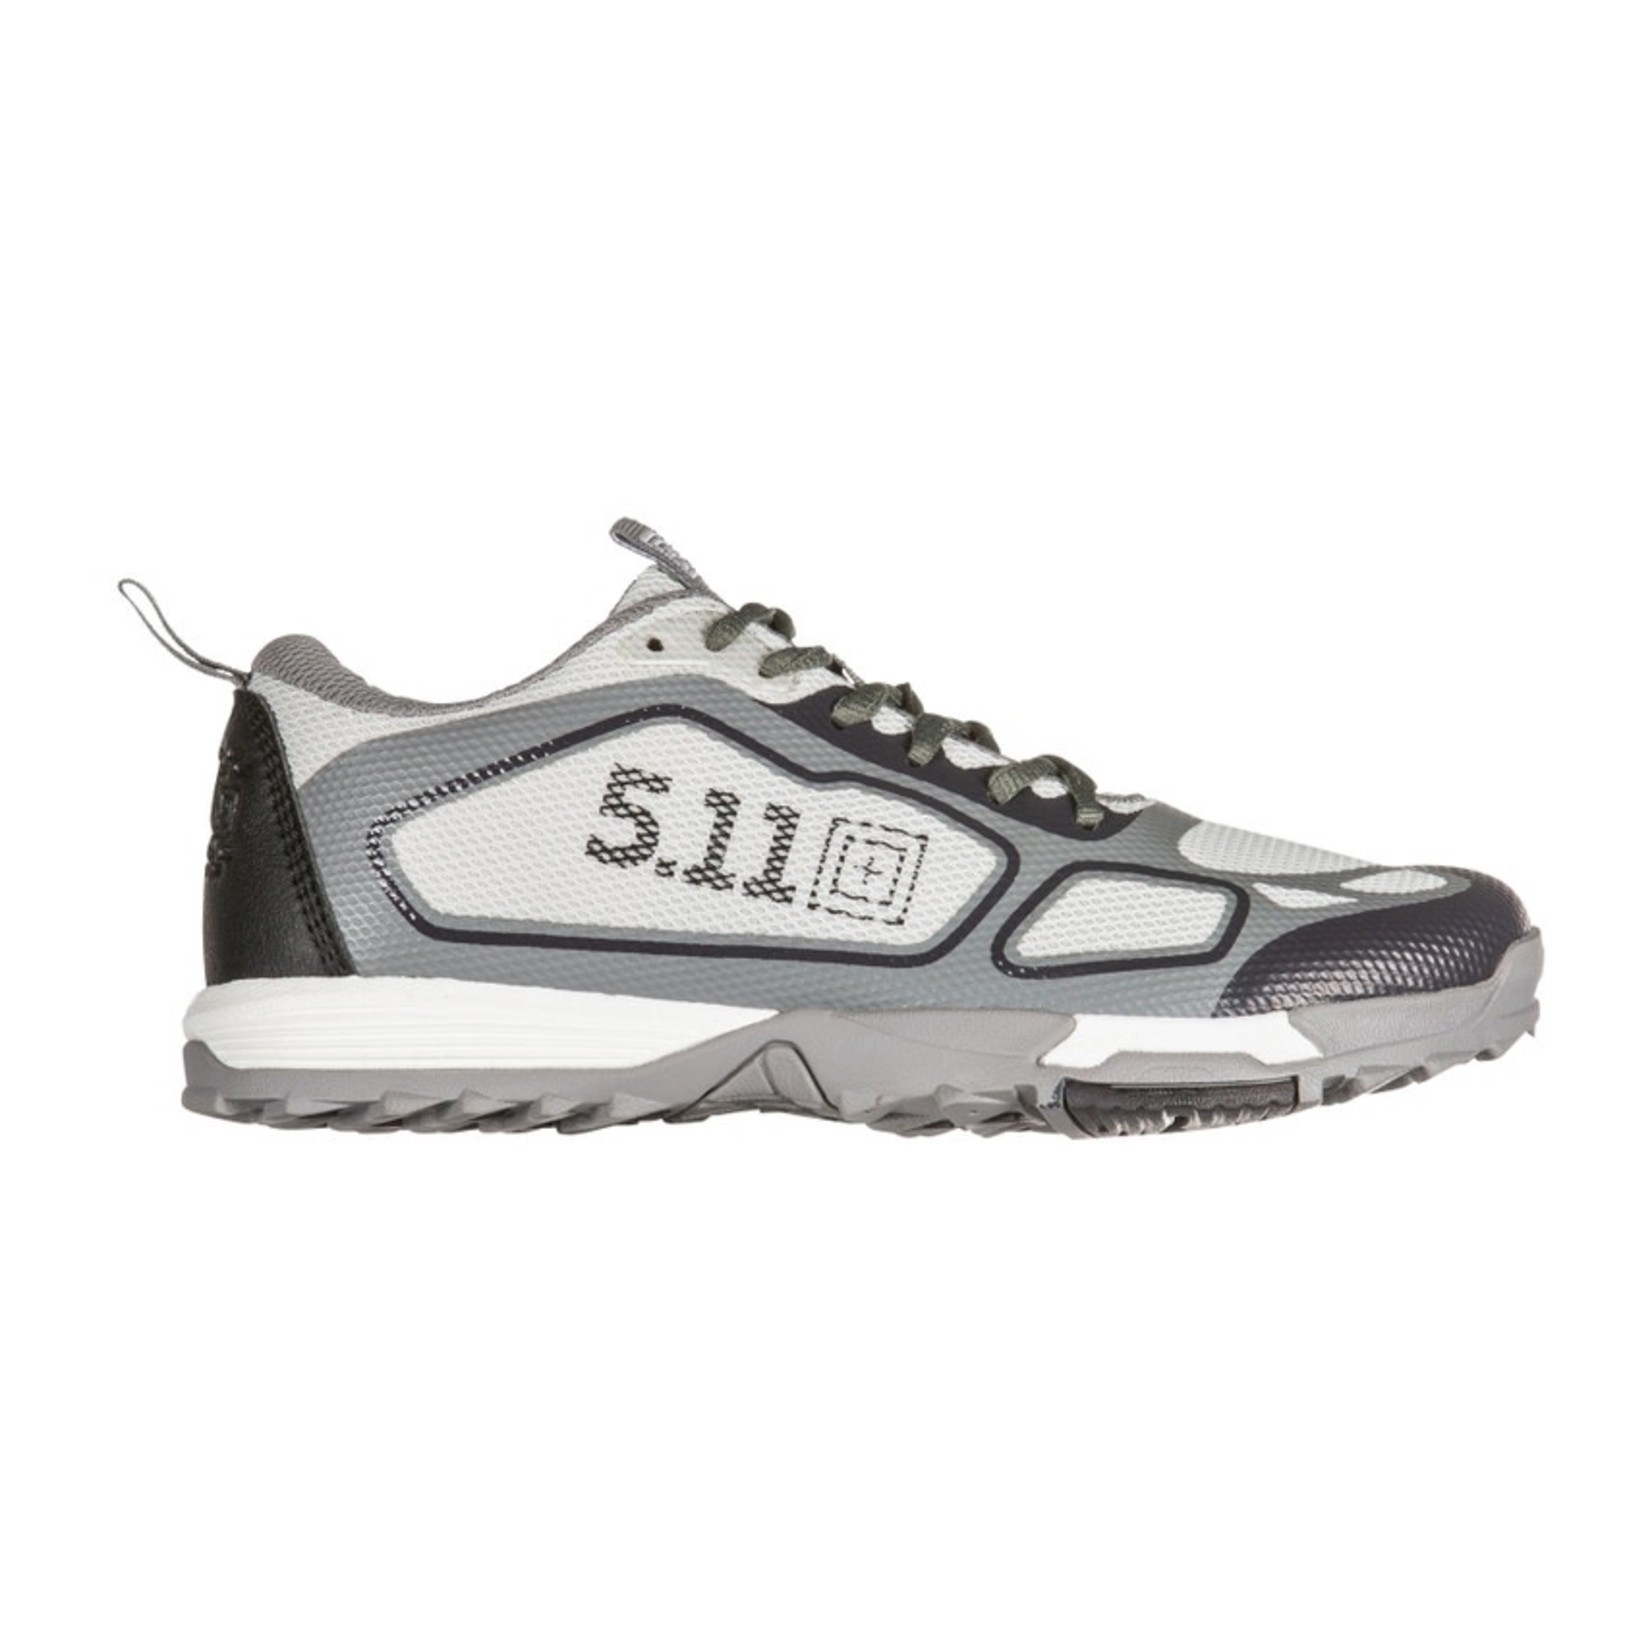 5.11 Tactical 5.11 Women's ABR Trainer